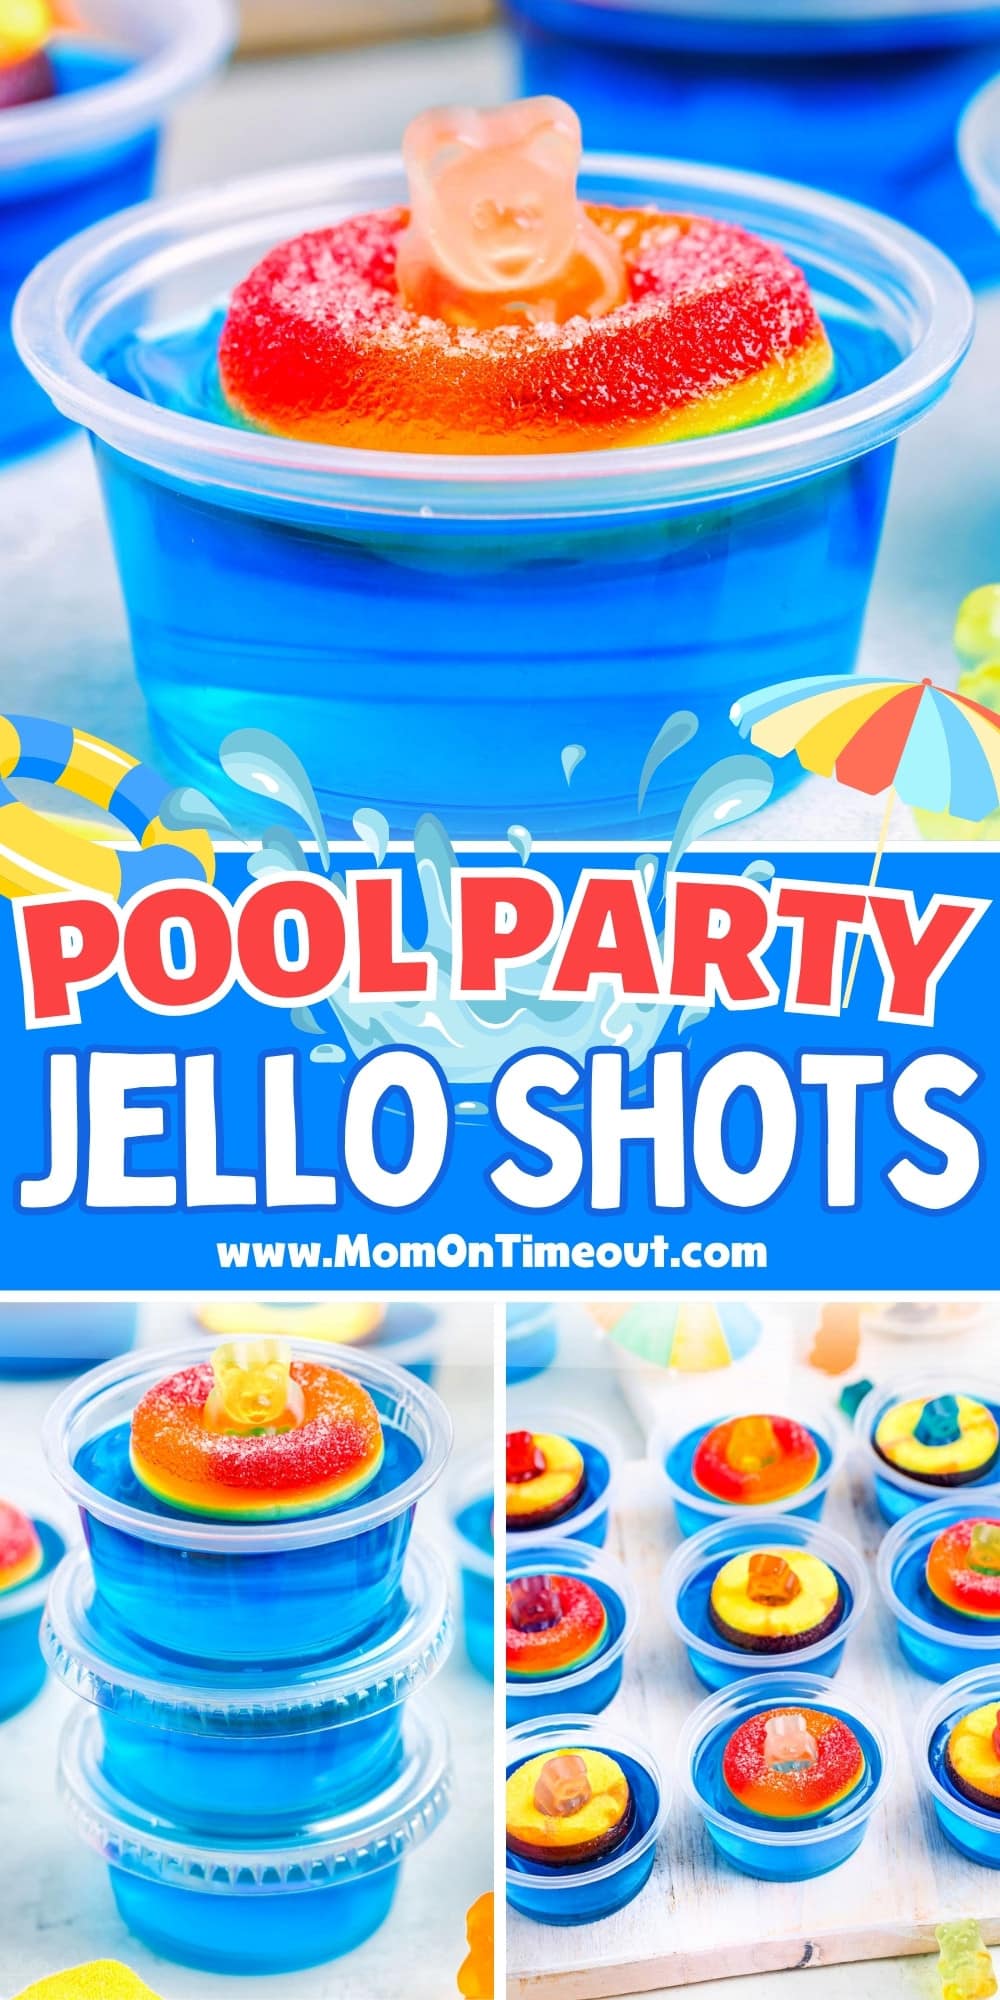 Pool Party Jello Shots - Mom On Timeout